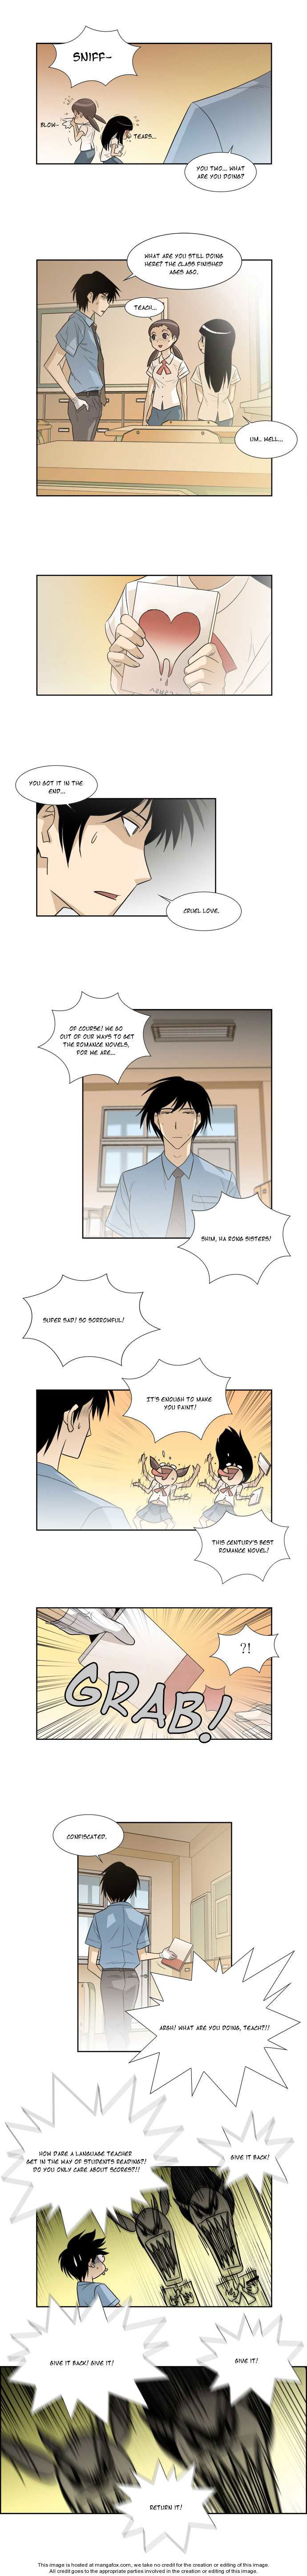 Melo Holic Chapter 018 page 4